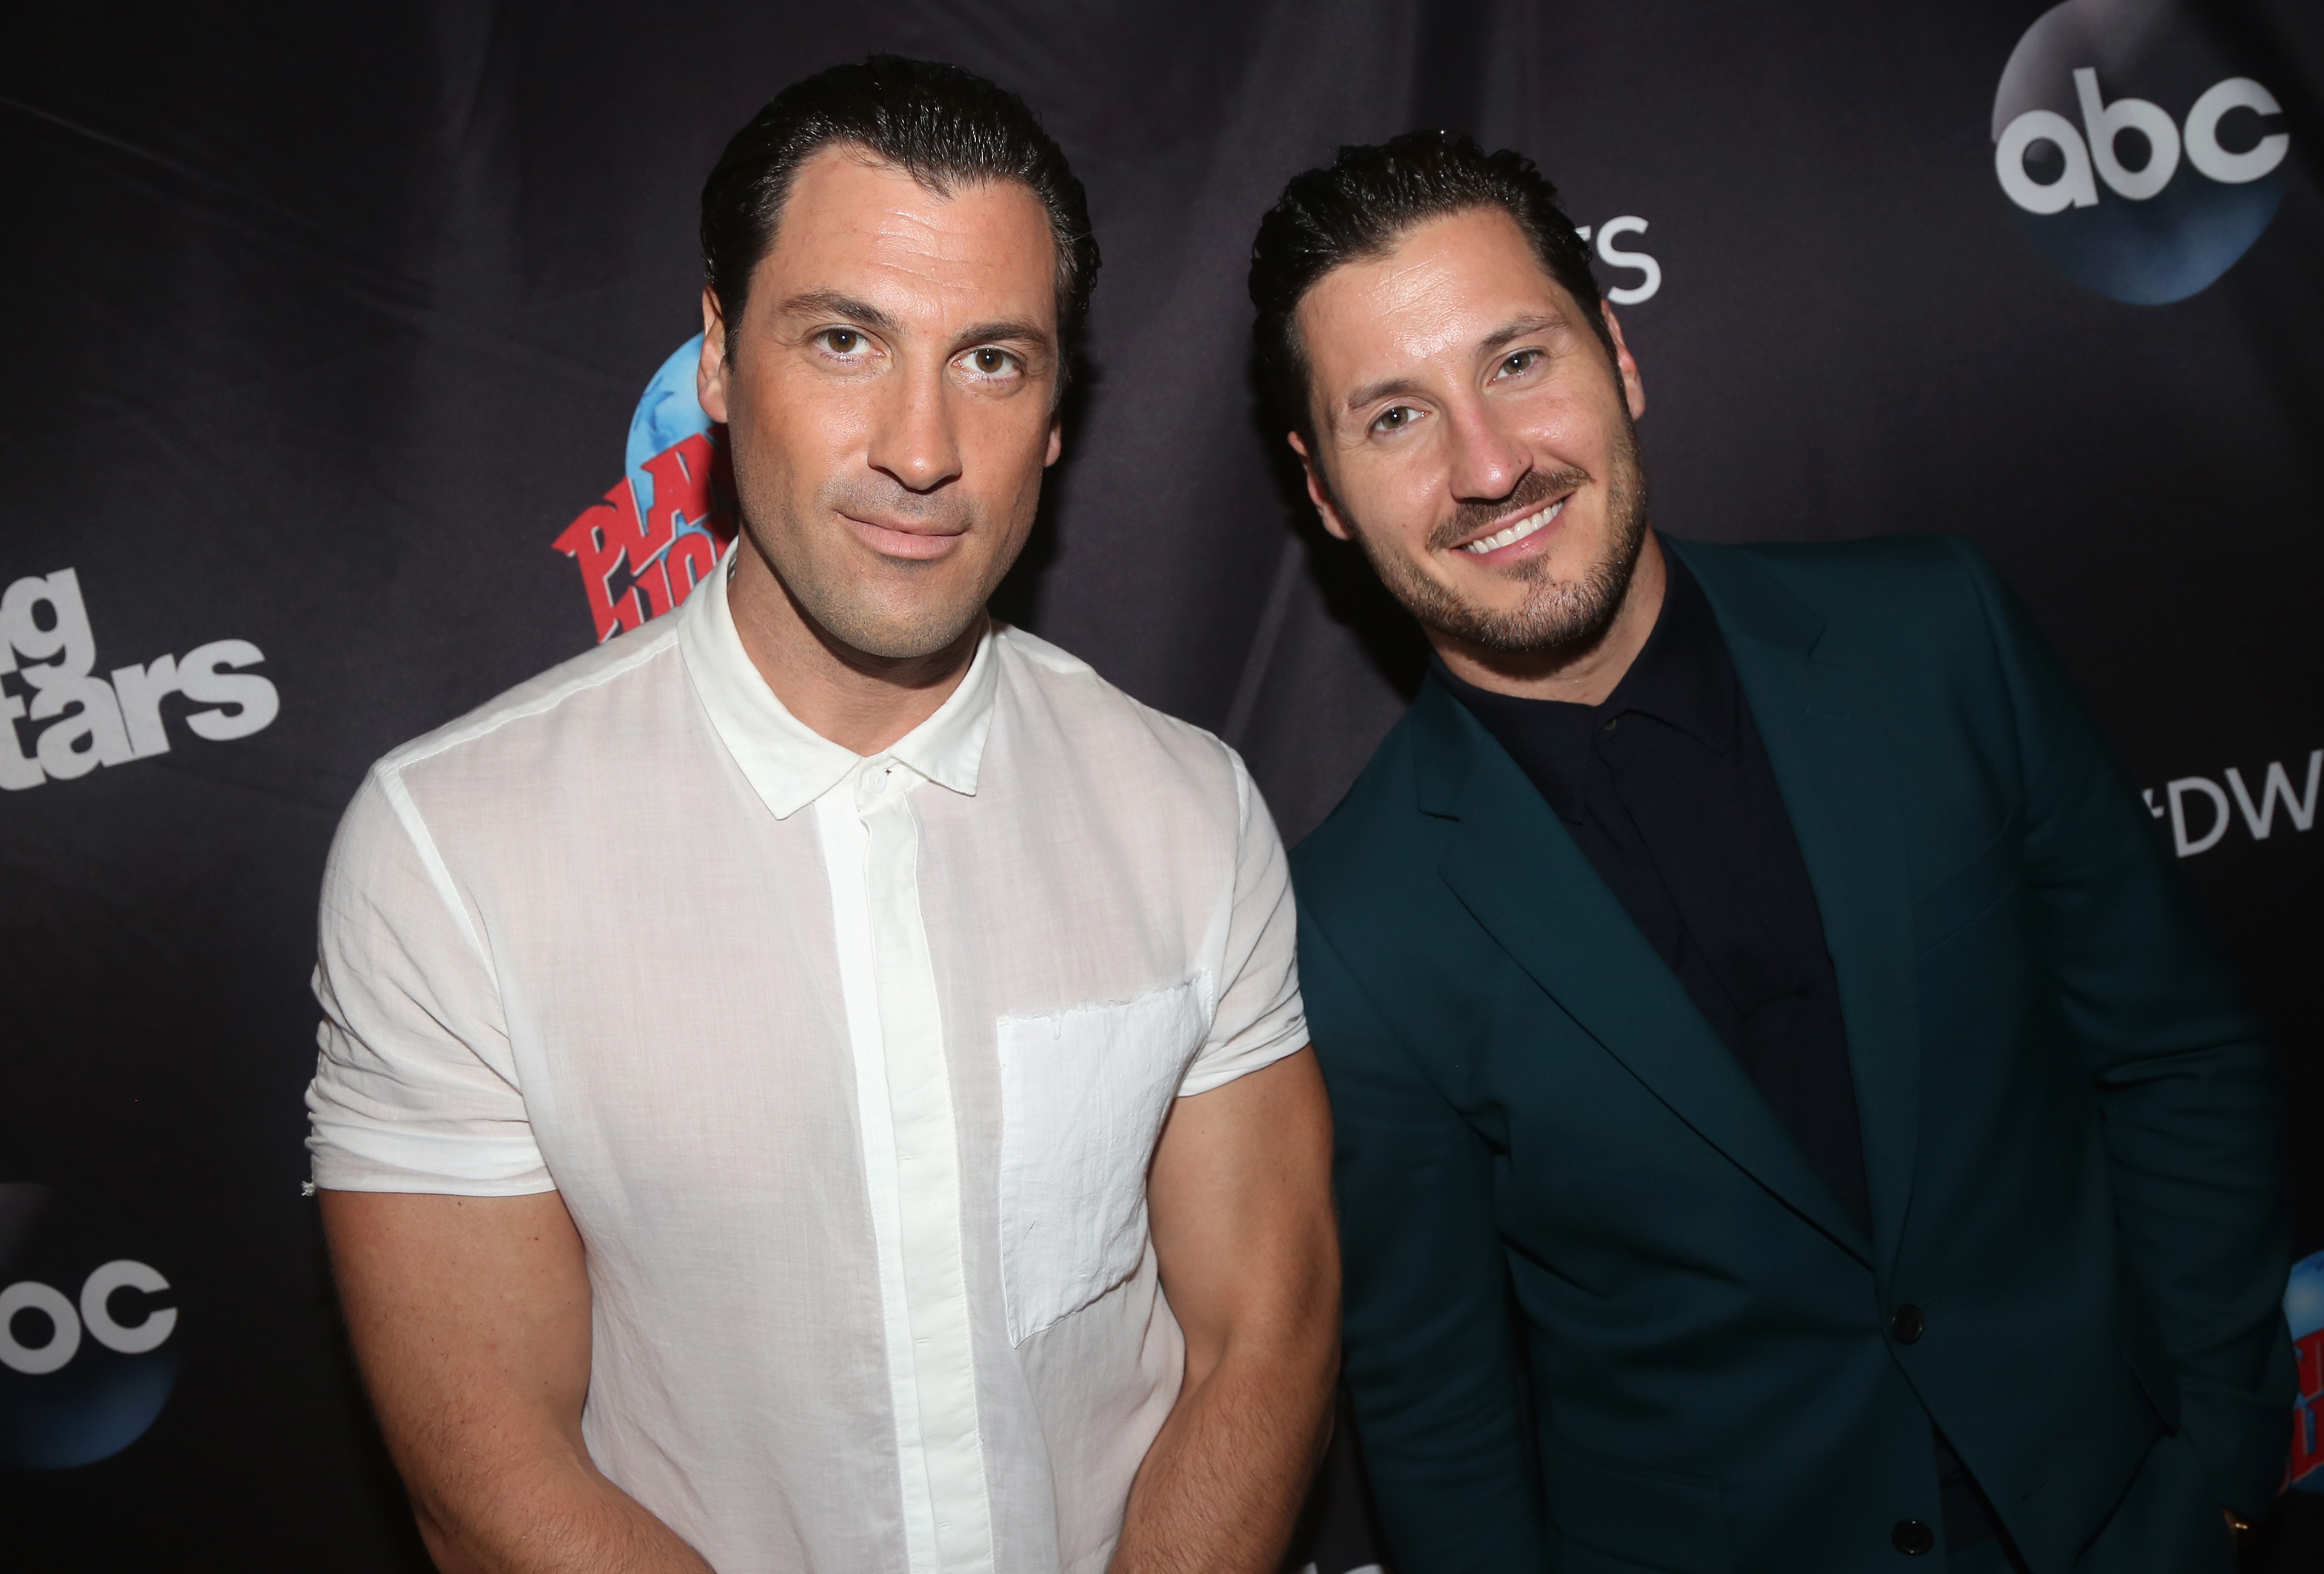 Maks Chmerkovskiy and Val Chmerkovskiy pose at ABC's 'Dancing with the Stars' Season 5 cast announcement event at Planet Hollywood Times Square 